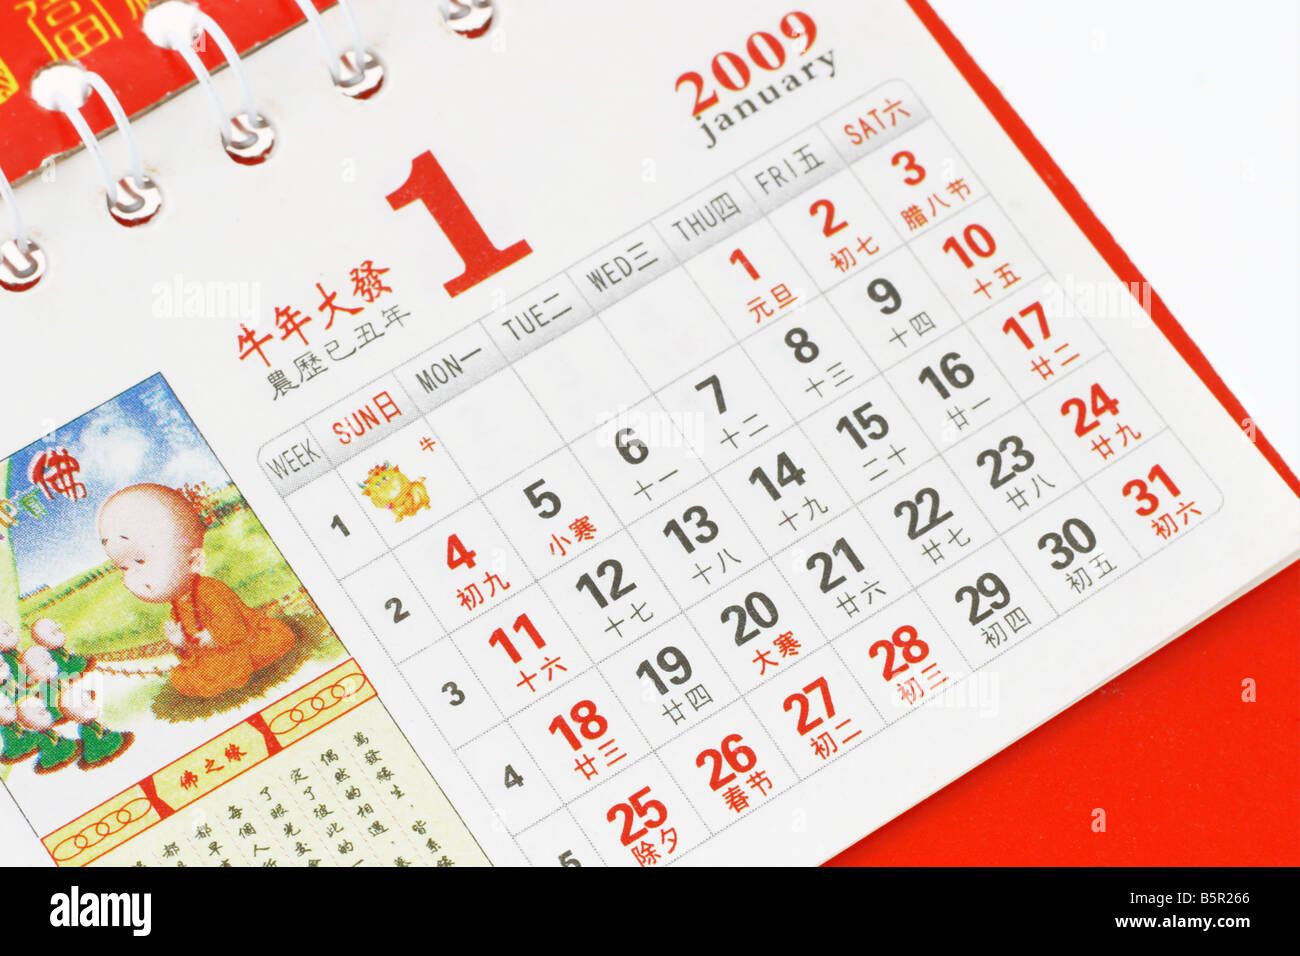 Day month year chinese calendar Banque d'images vectorielles - Page 3 -  Alamy